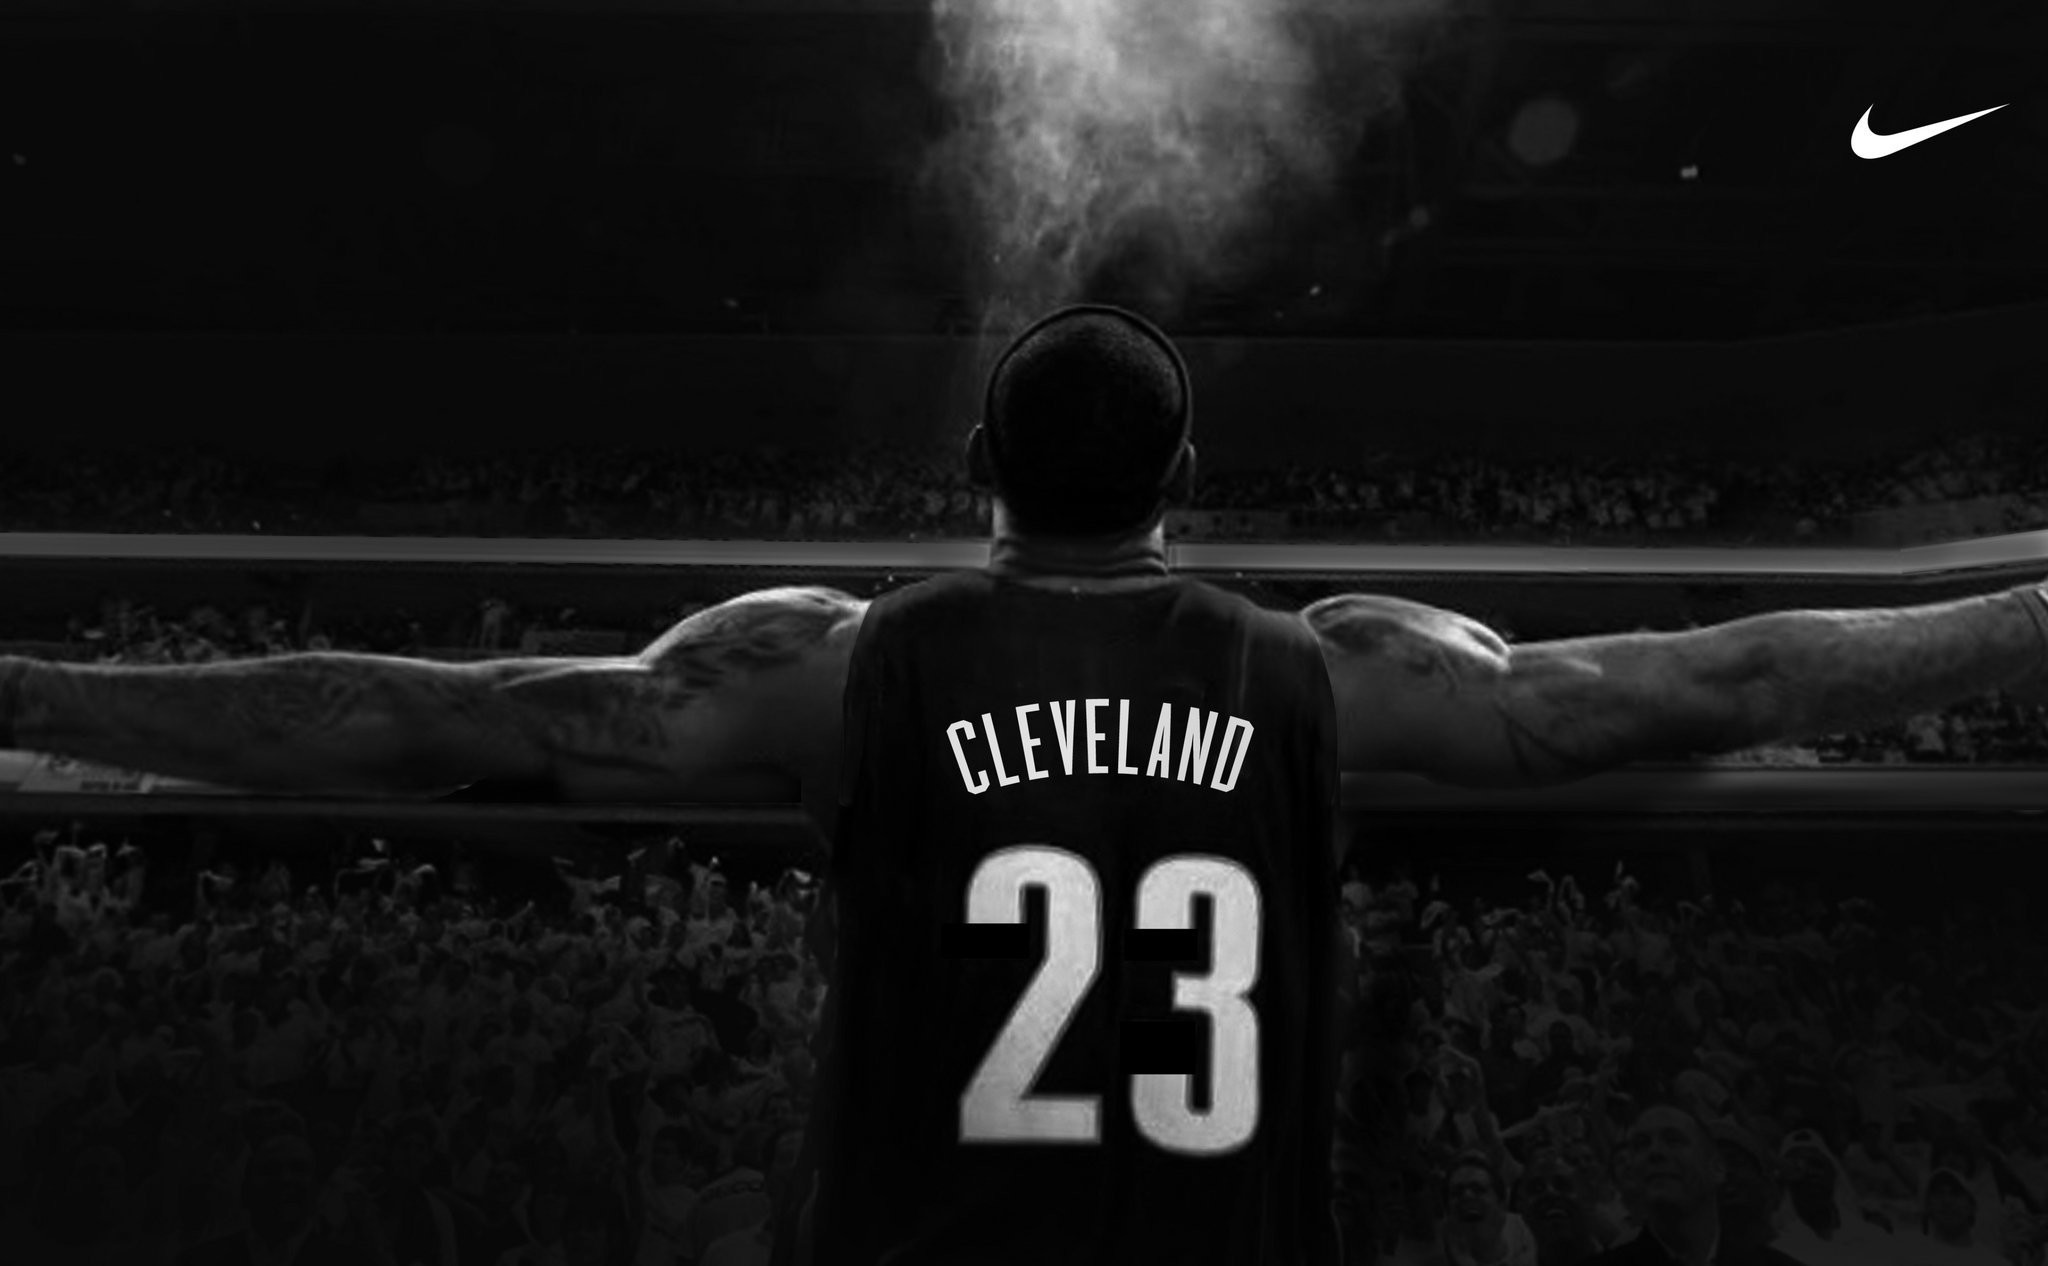 2048x1266 45 LeBron James Wallpapers for iPad 2 amp iPad Free Download Aolor ... -